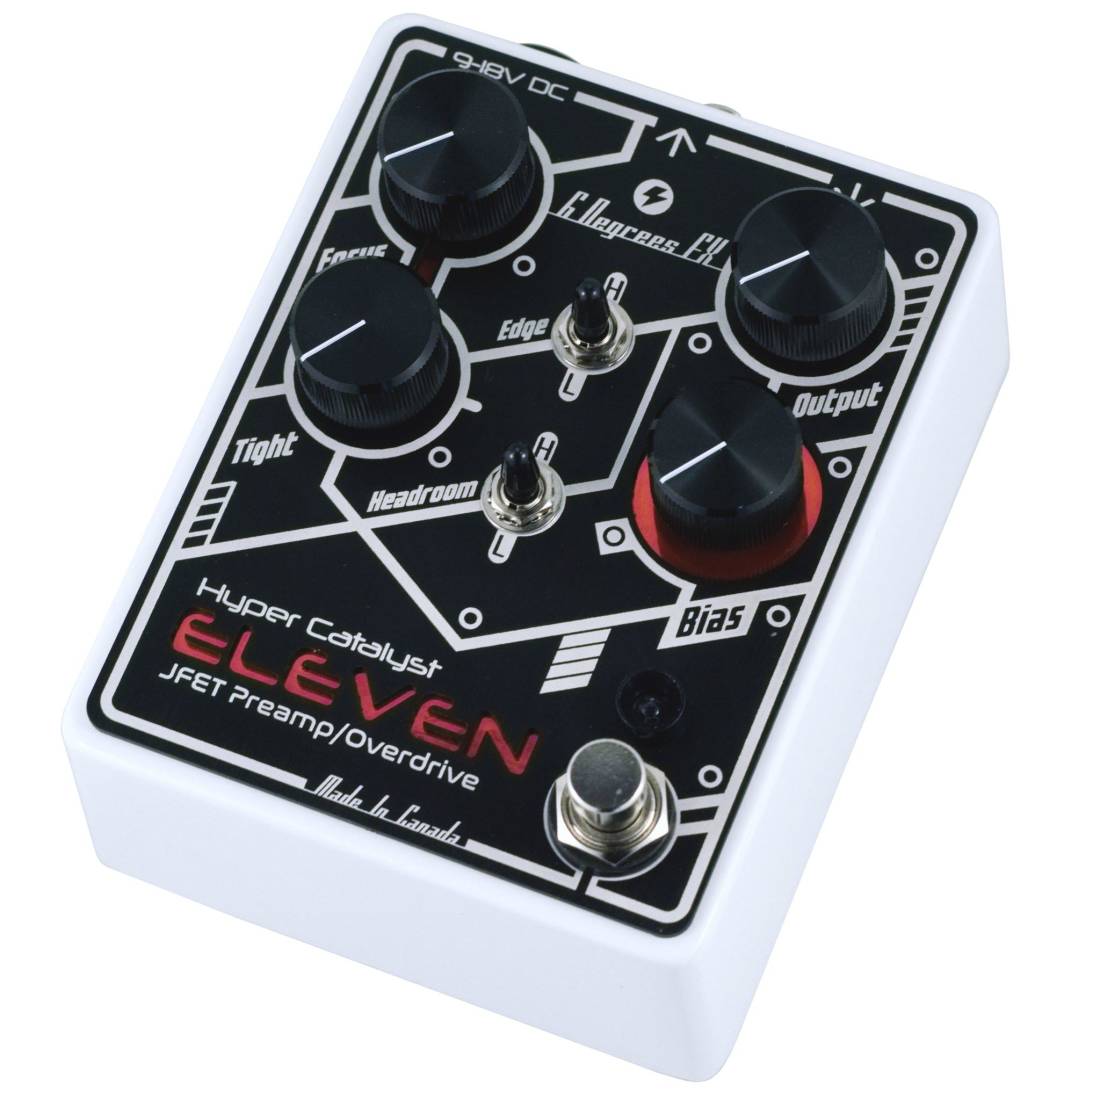 Hyper Catalyst ELEVEN JFET Preamp / Overdrive Pedal